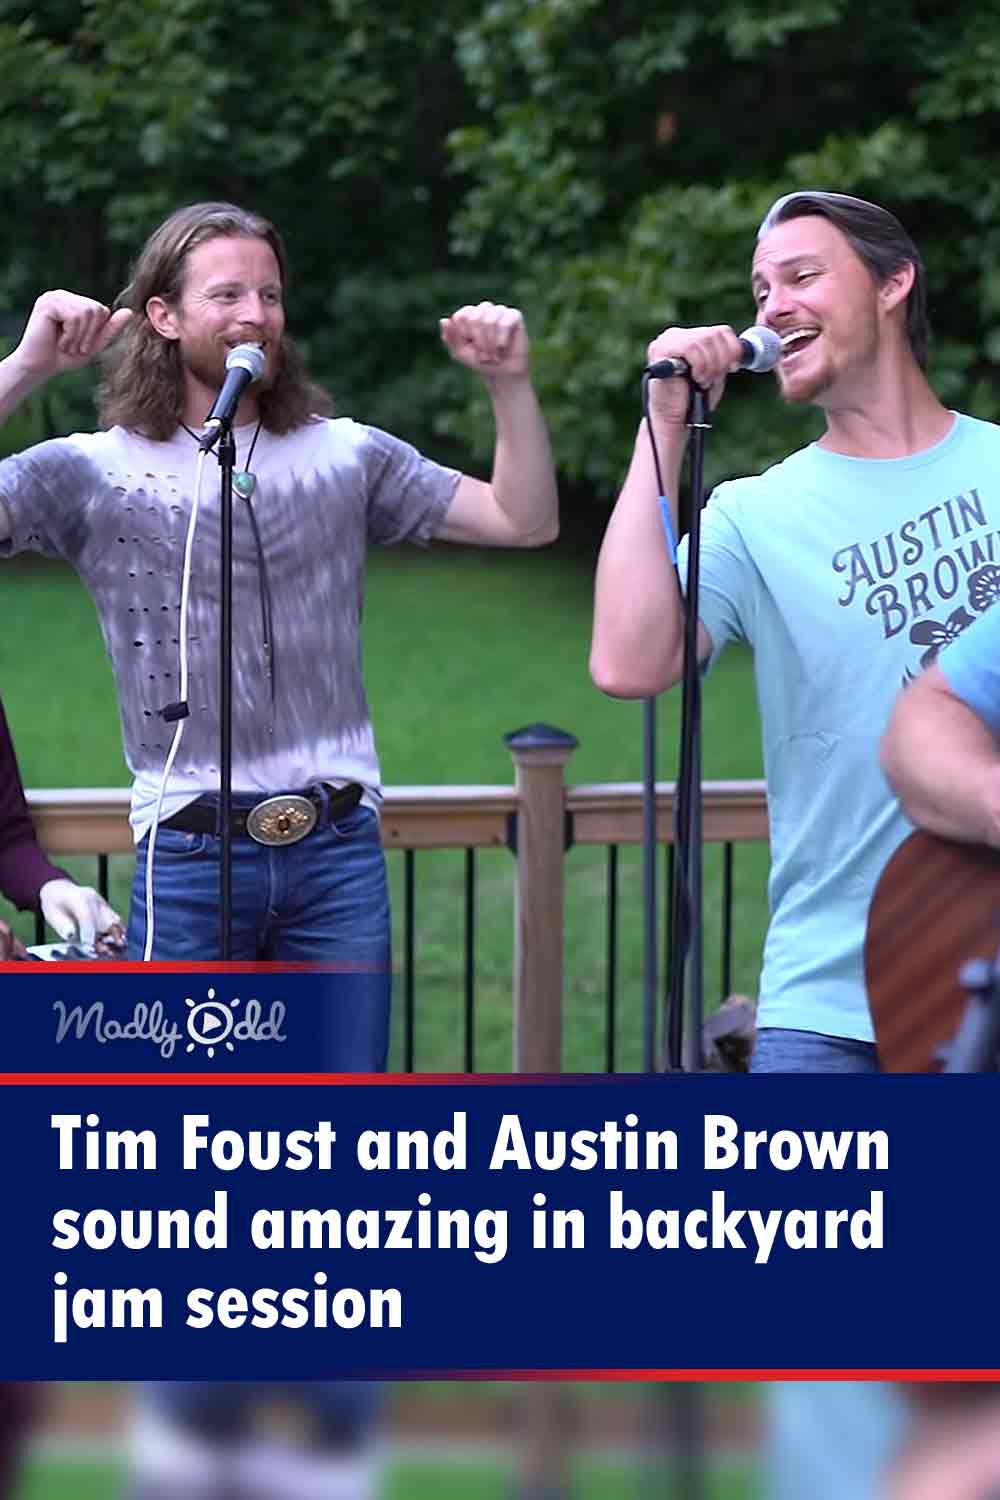 Tim Foust and Austin Brown sound amazing in backyard jam session